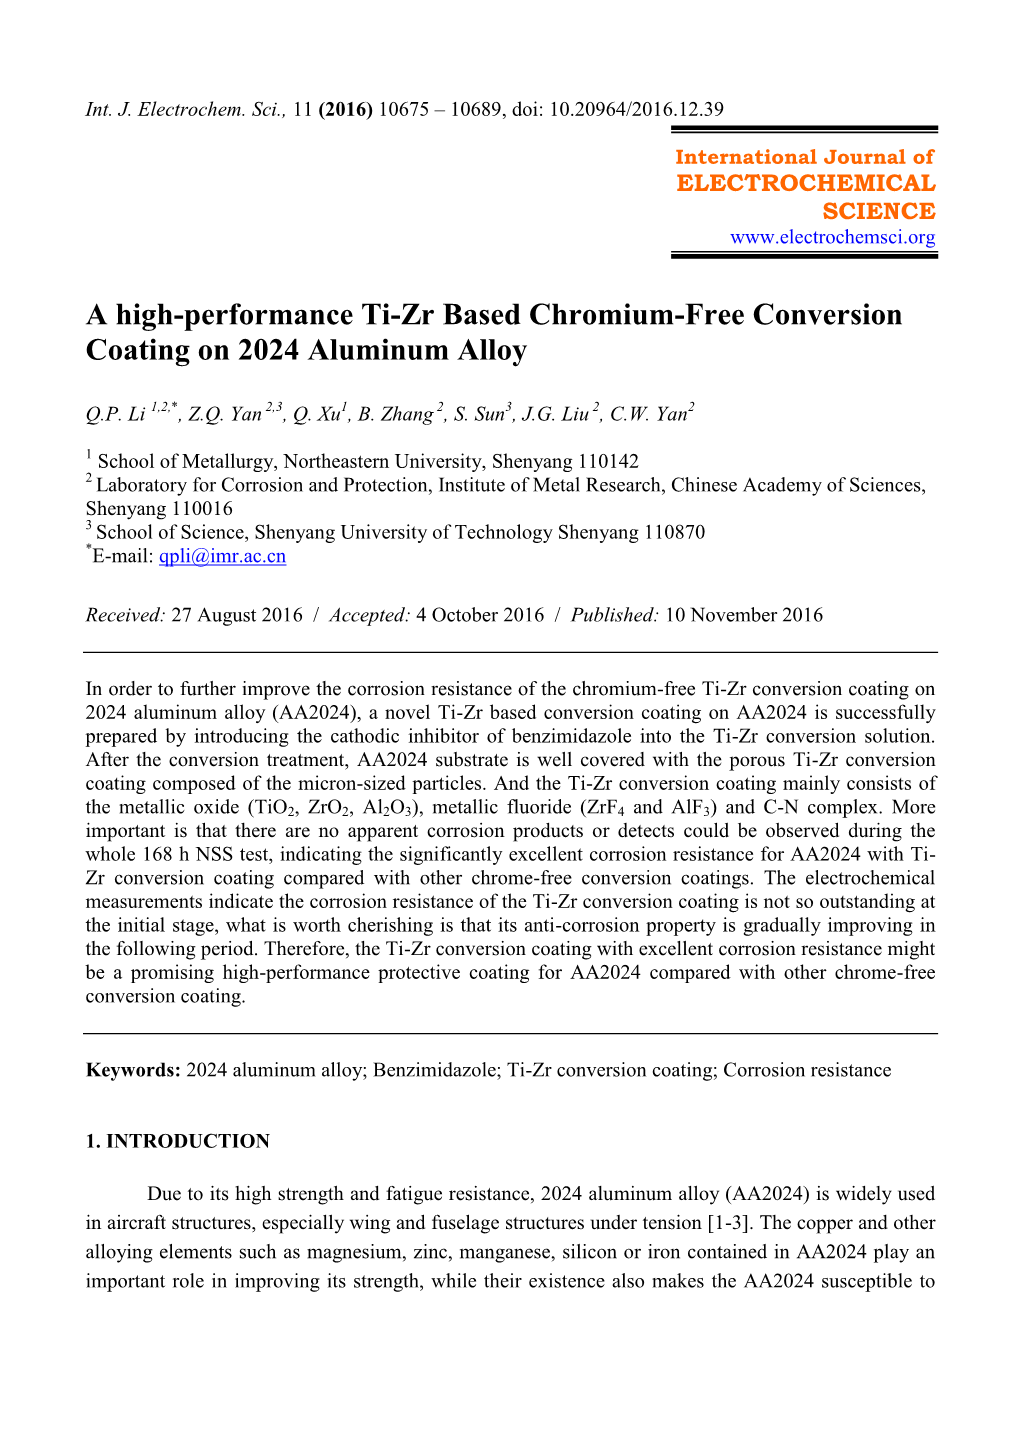 A High-Performance Ti-Zr Based Chromium-Free Conversion Coating on 2024 Aluminum Alloy